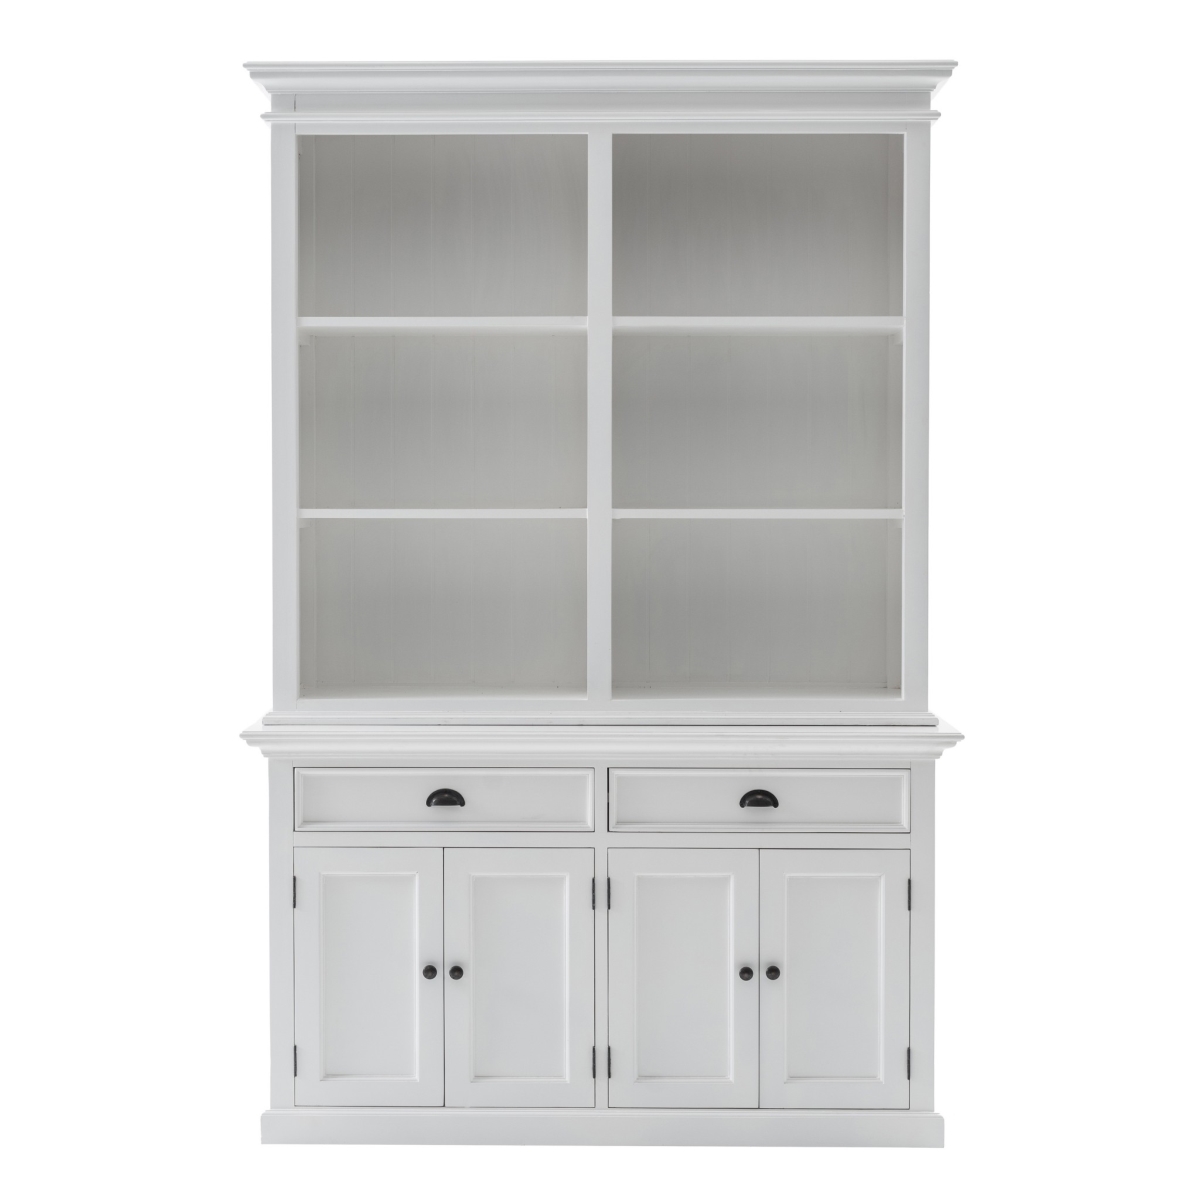 Picture of HomeRoots 397122 86.61 x 57.09 x 19.69 in. Classic White Buffet Hutch Unit with 6 Shelves